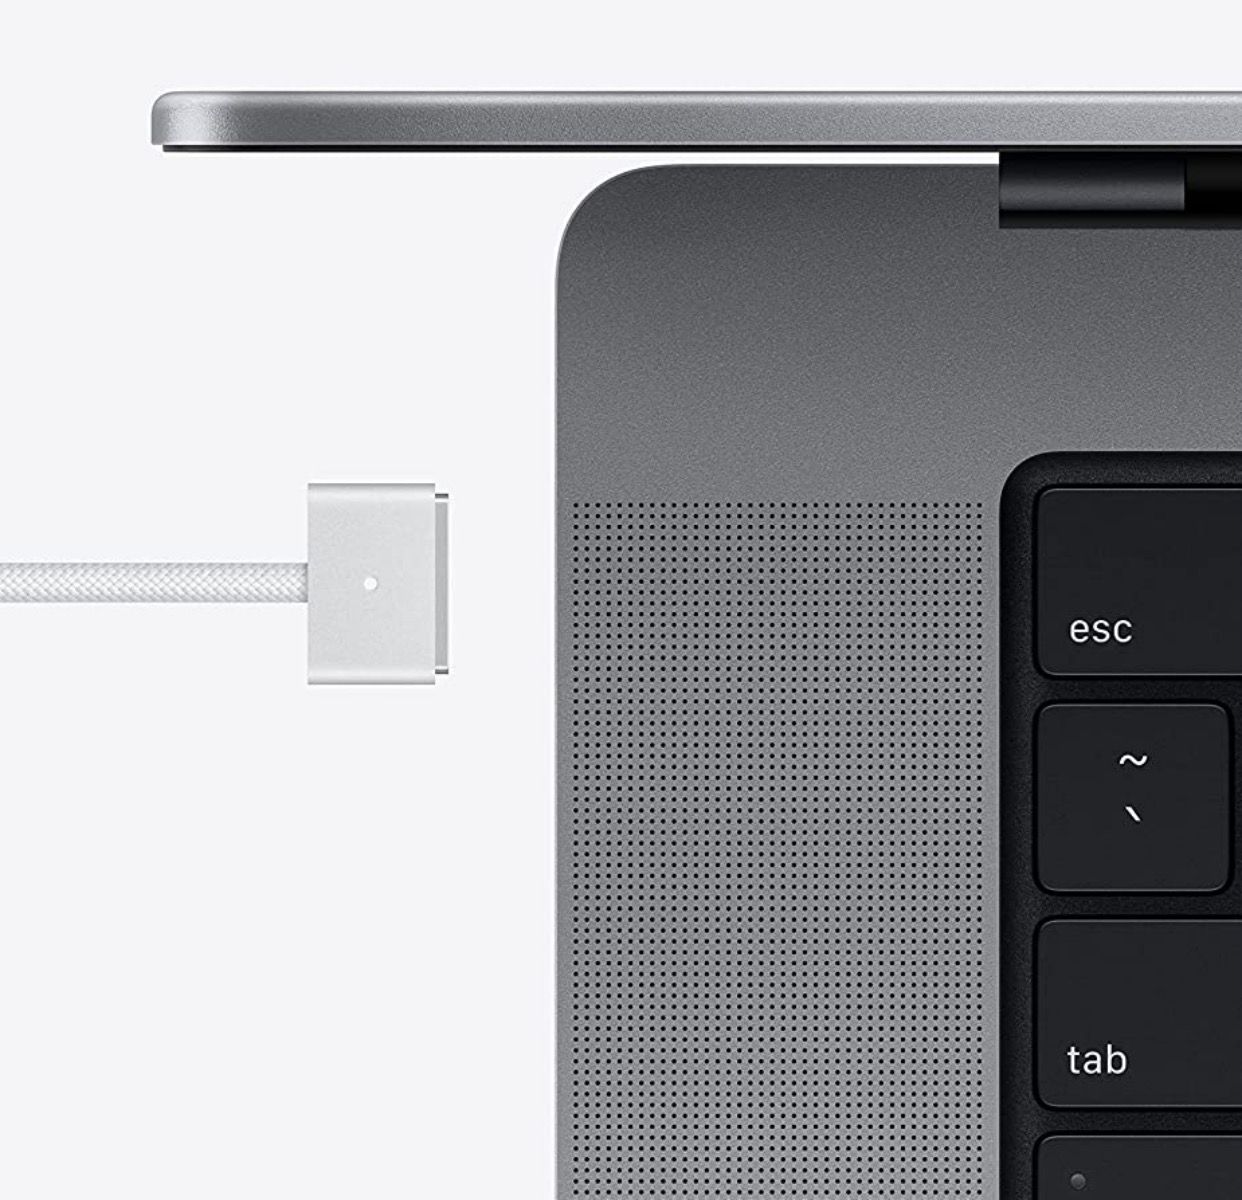 Shot of top-left corner of MacBook pro showing the MagSafe charger and where it connects